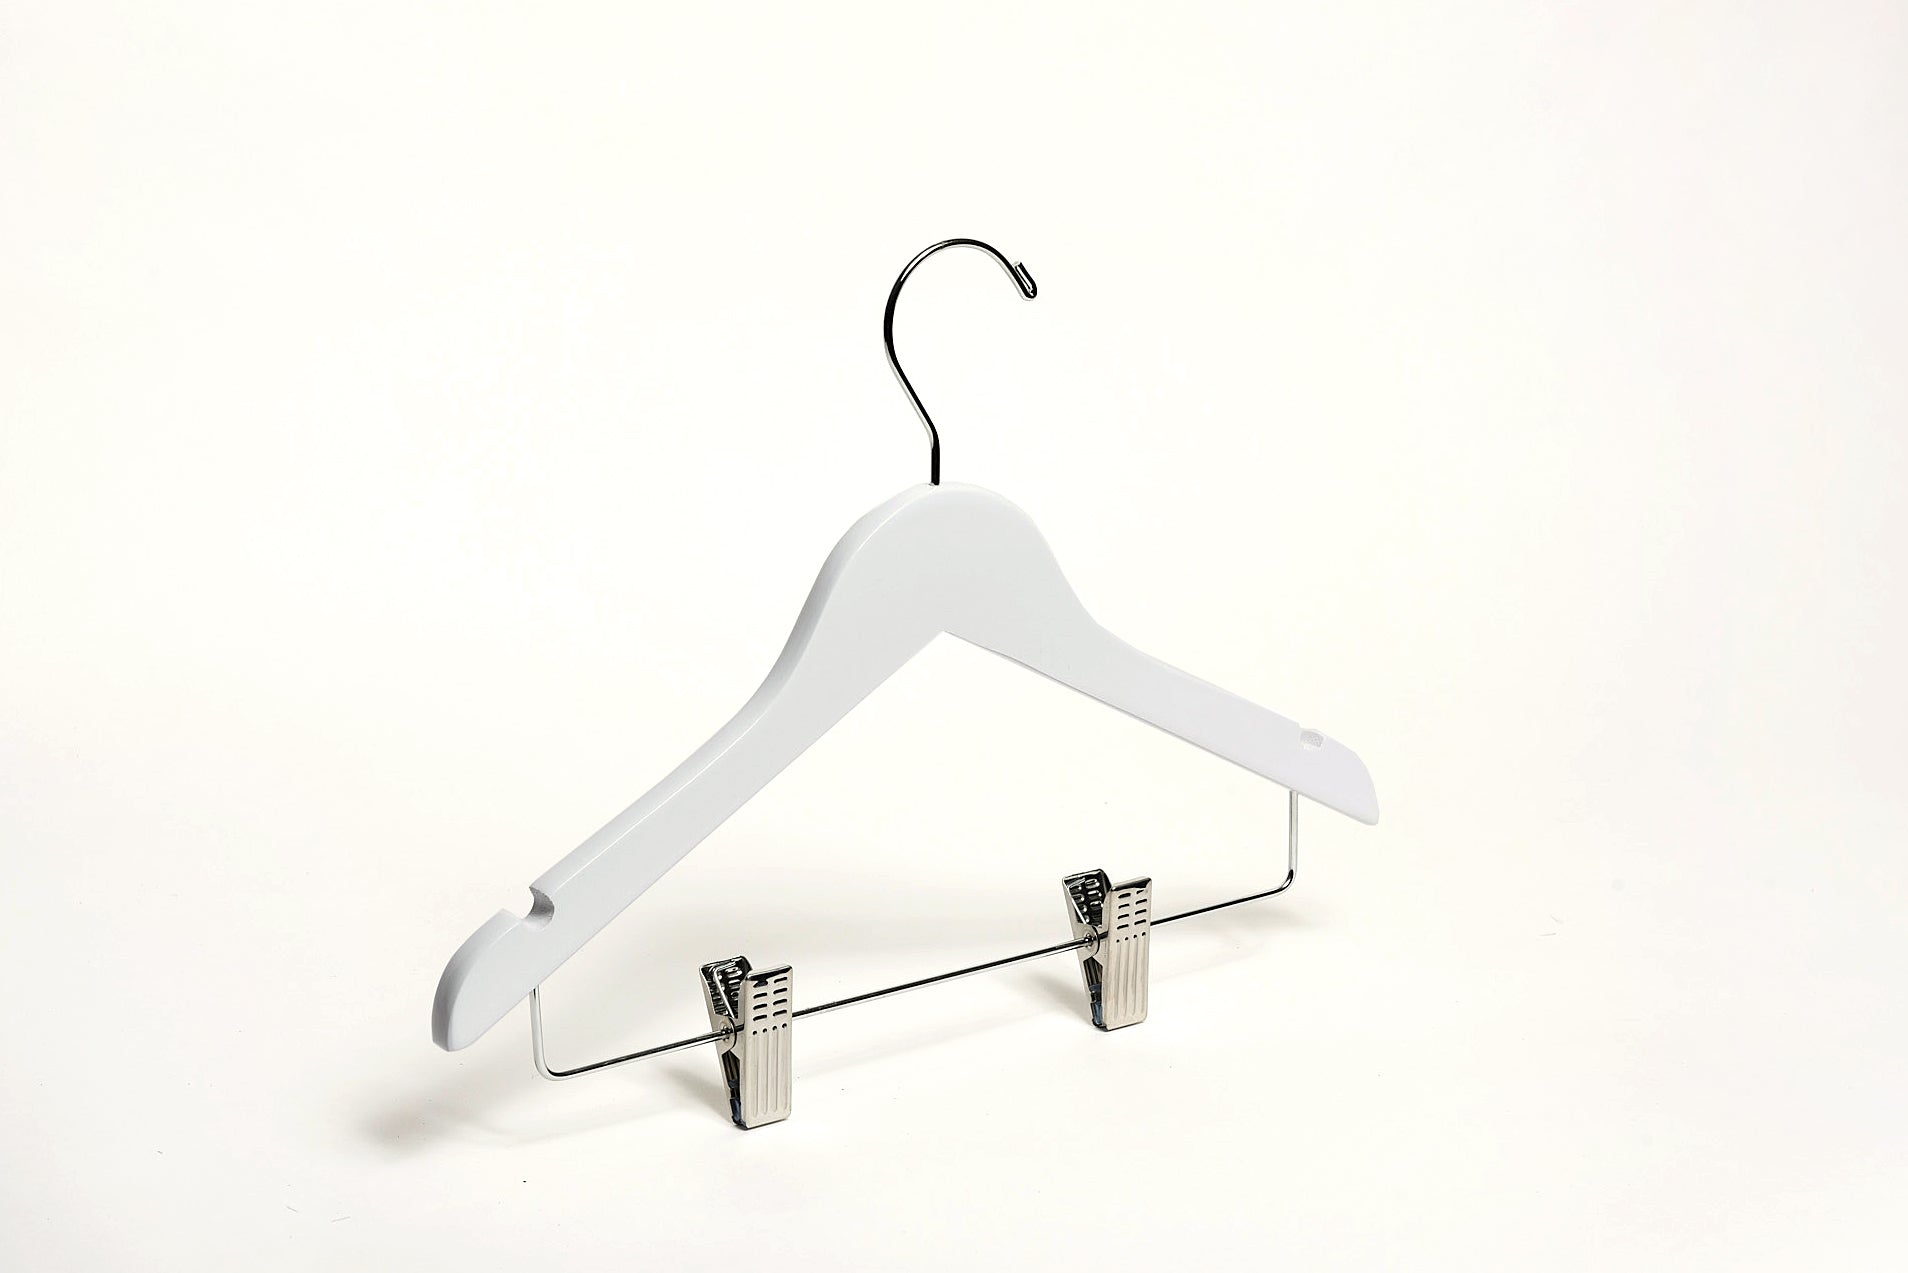 Slim Metal Combo Hanger with Adjustable Cushion Clips, Sturdy